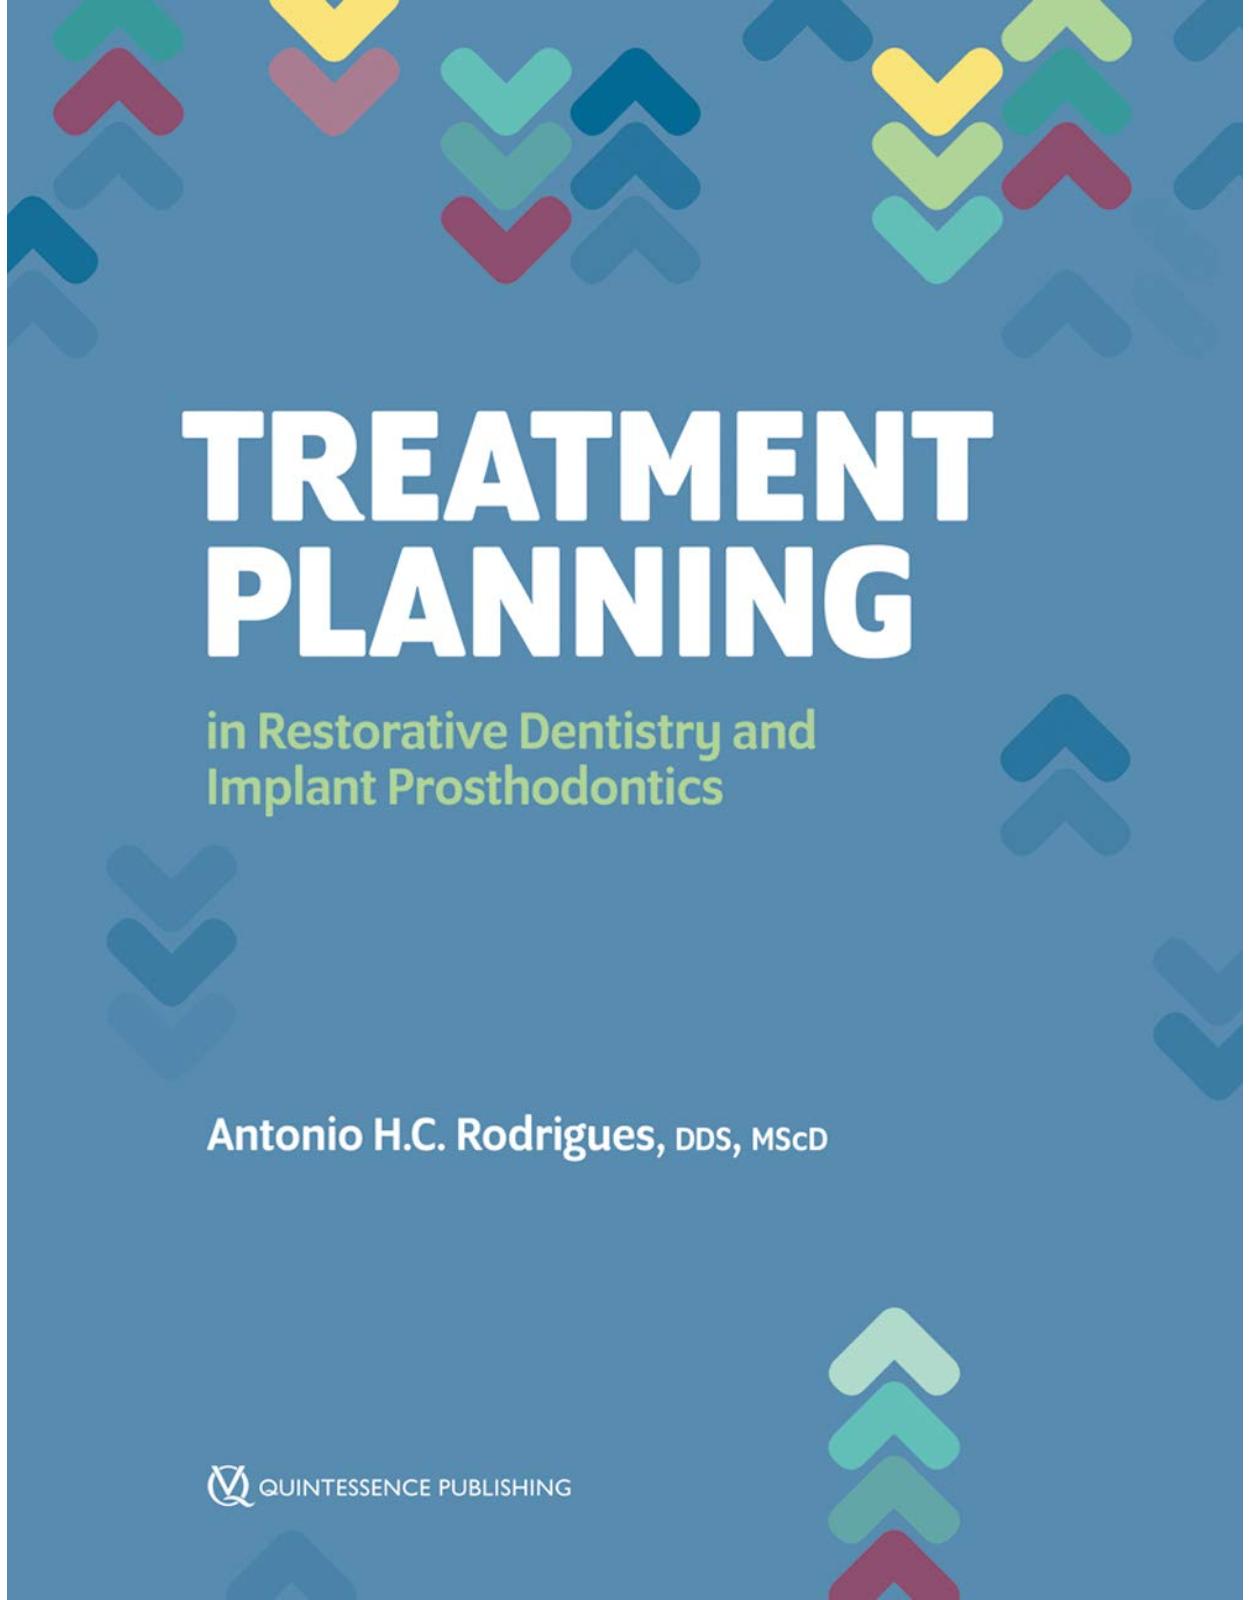 Treatment Planning in Restorative Dentistry and Implant Prosthodontics